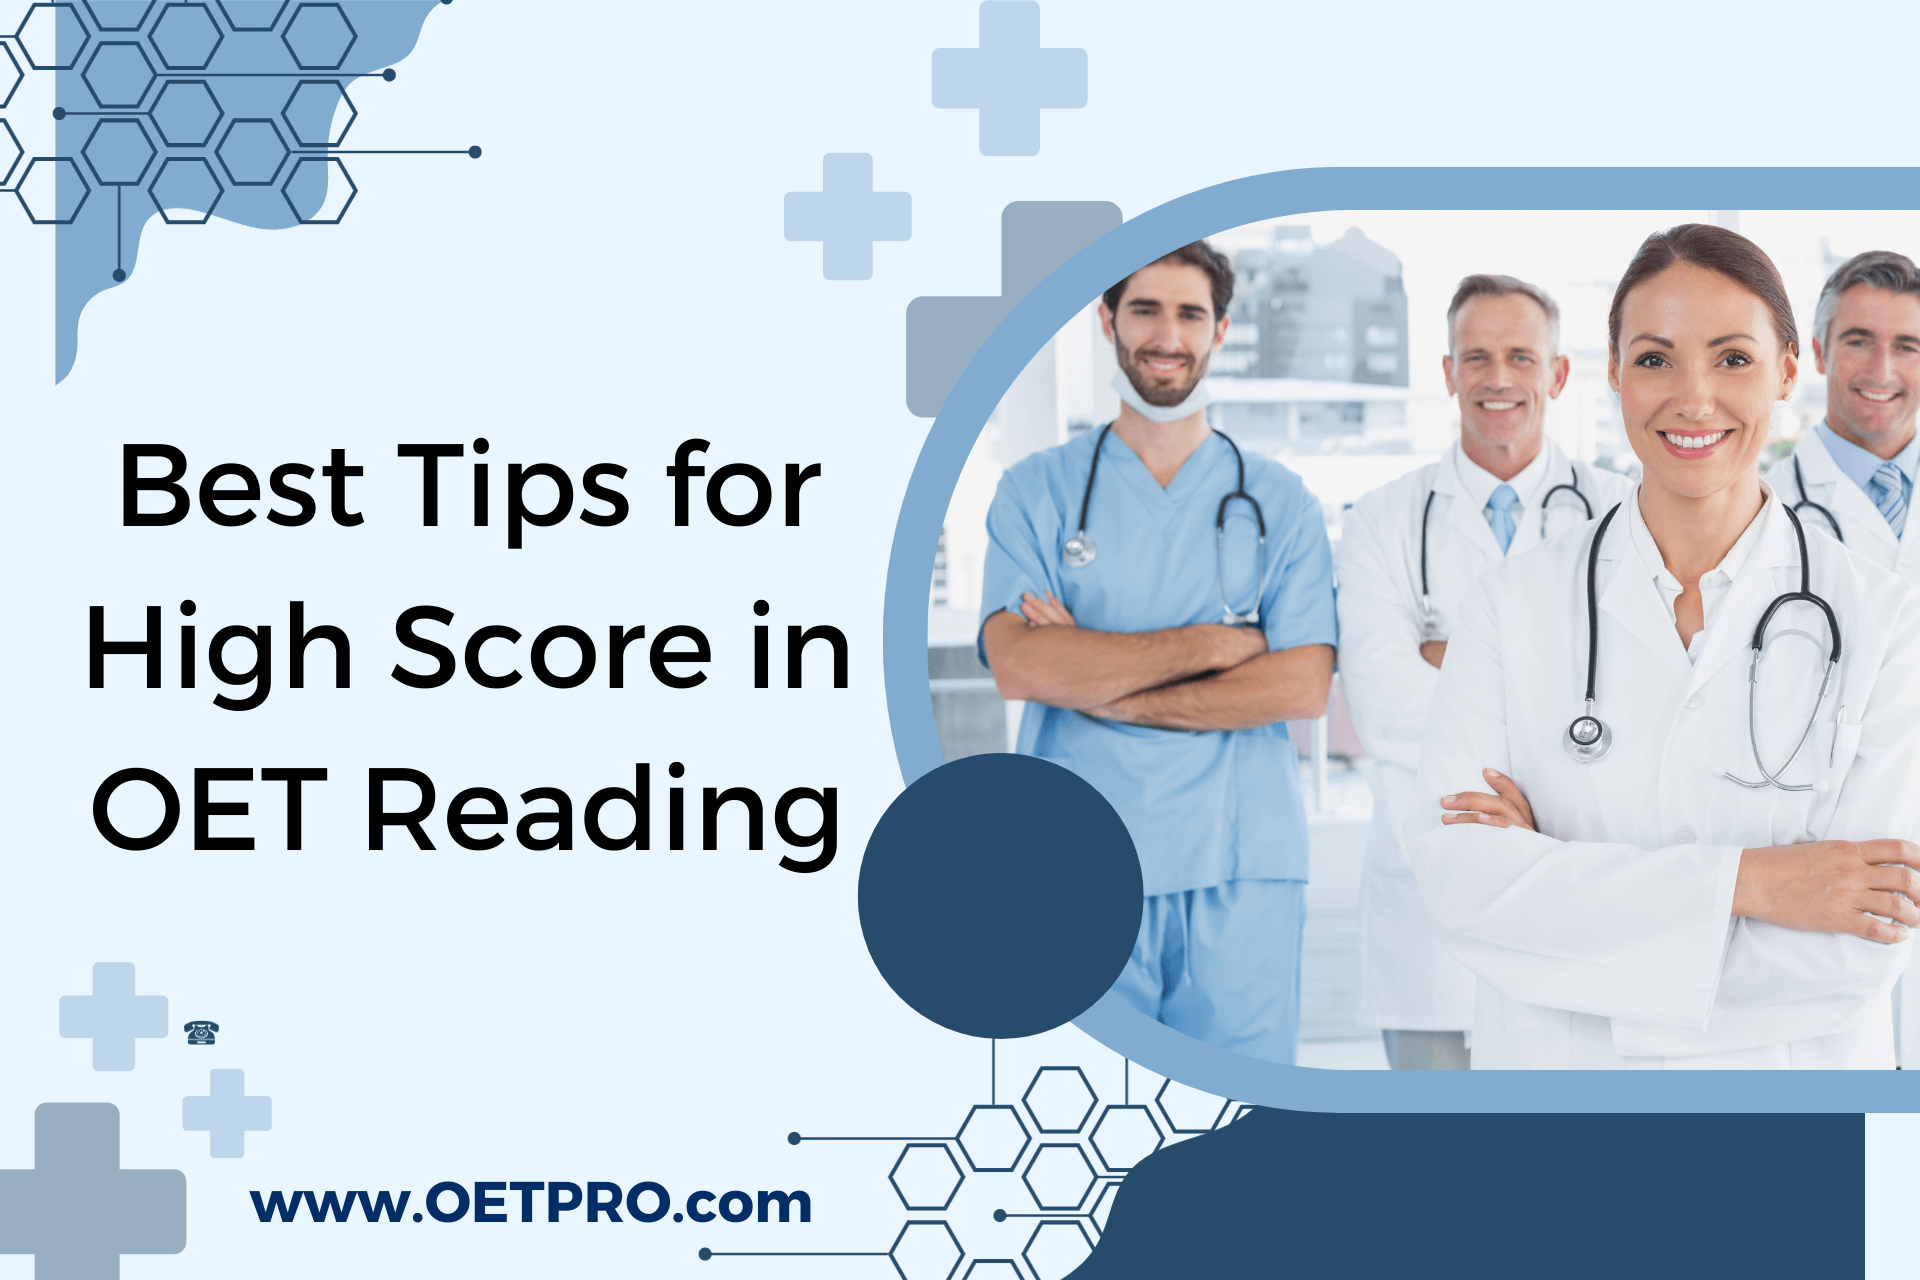 Best Tips for High Score in OET Reading